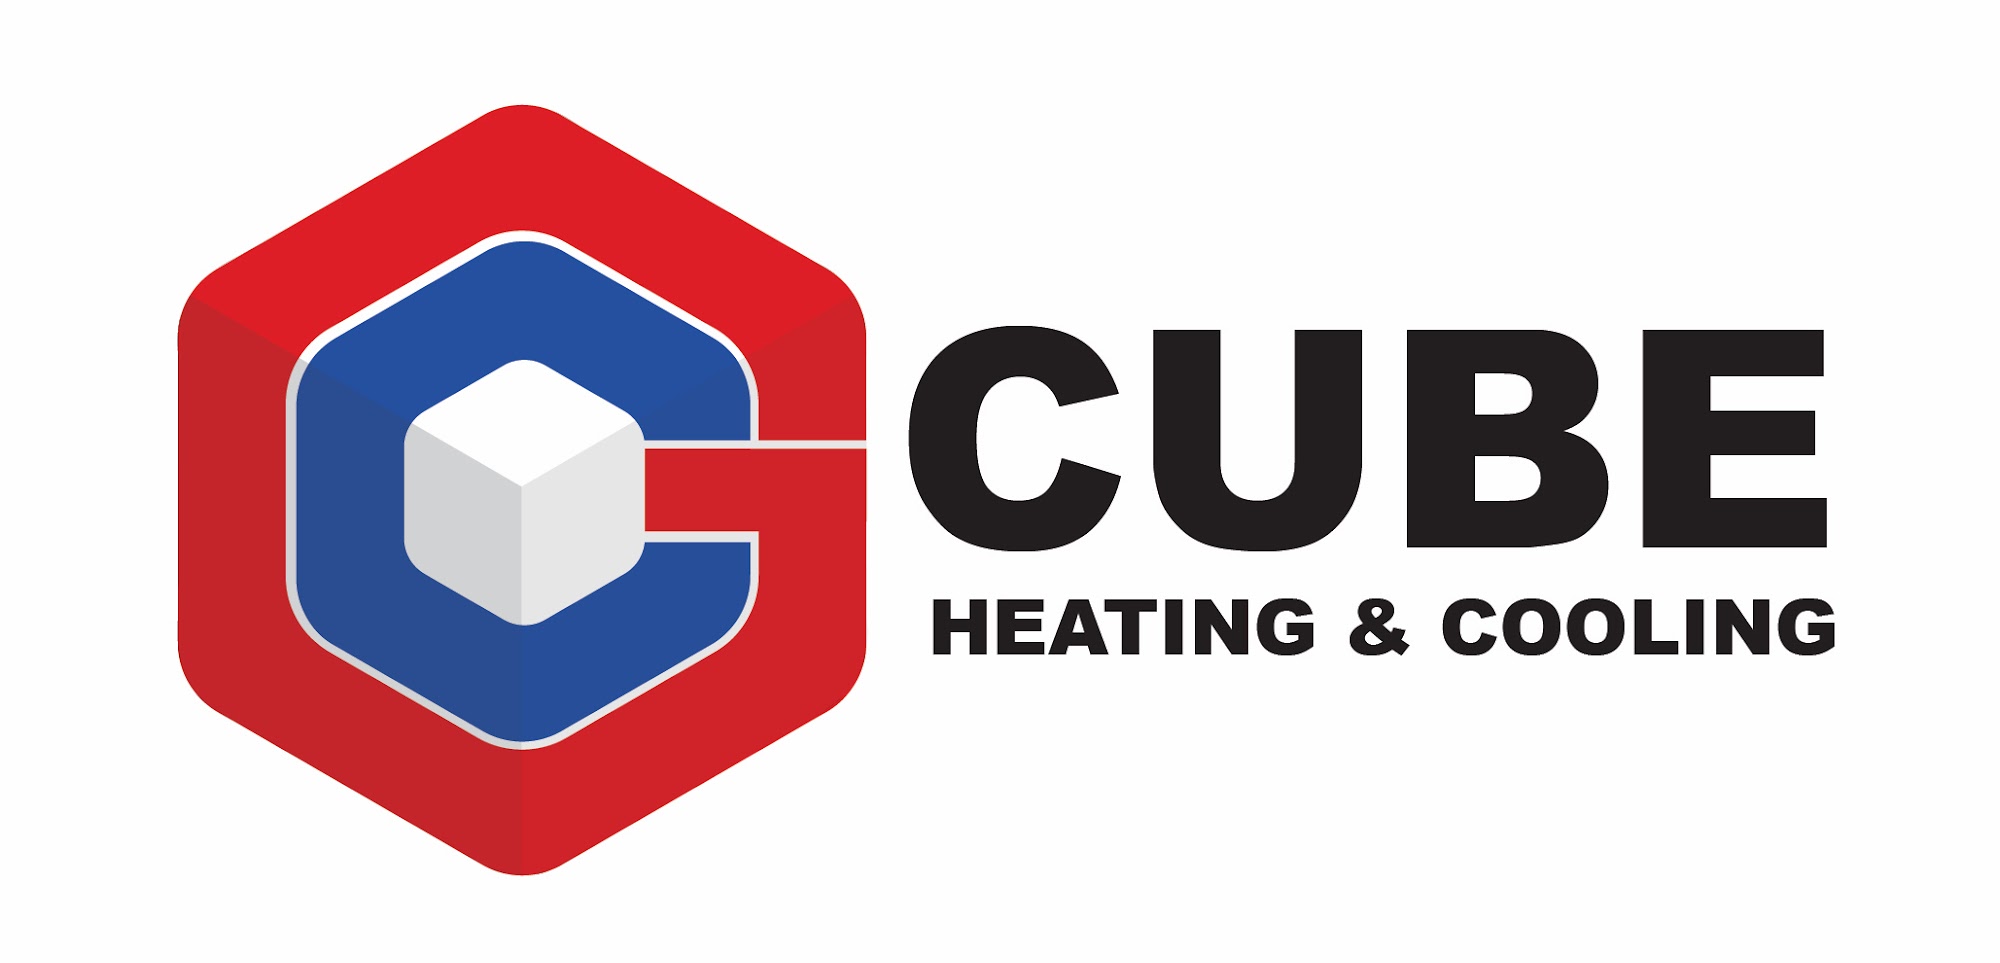 CUBE Heating & Cooling